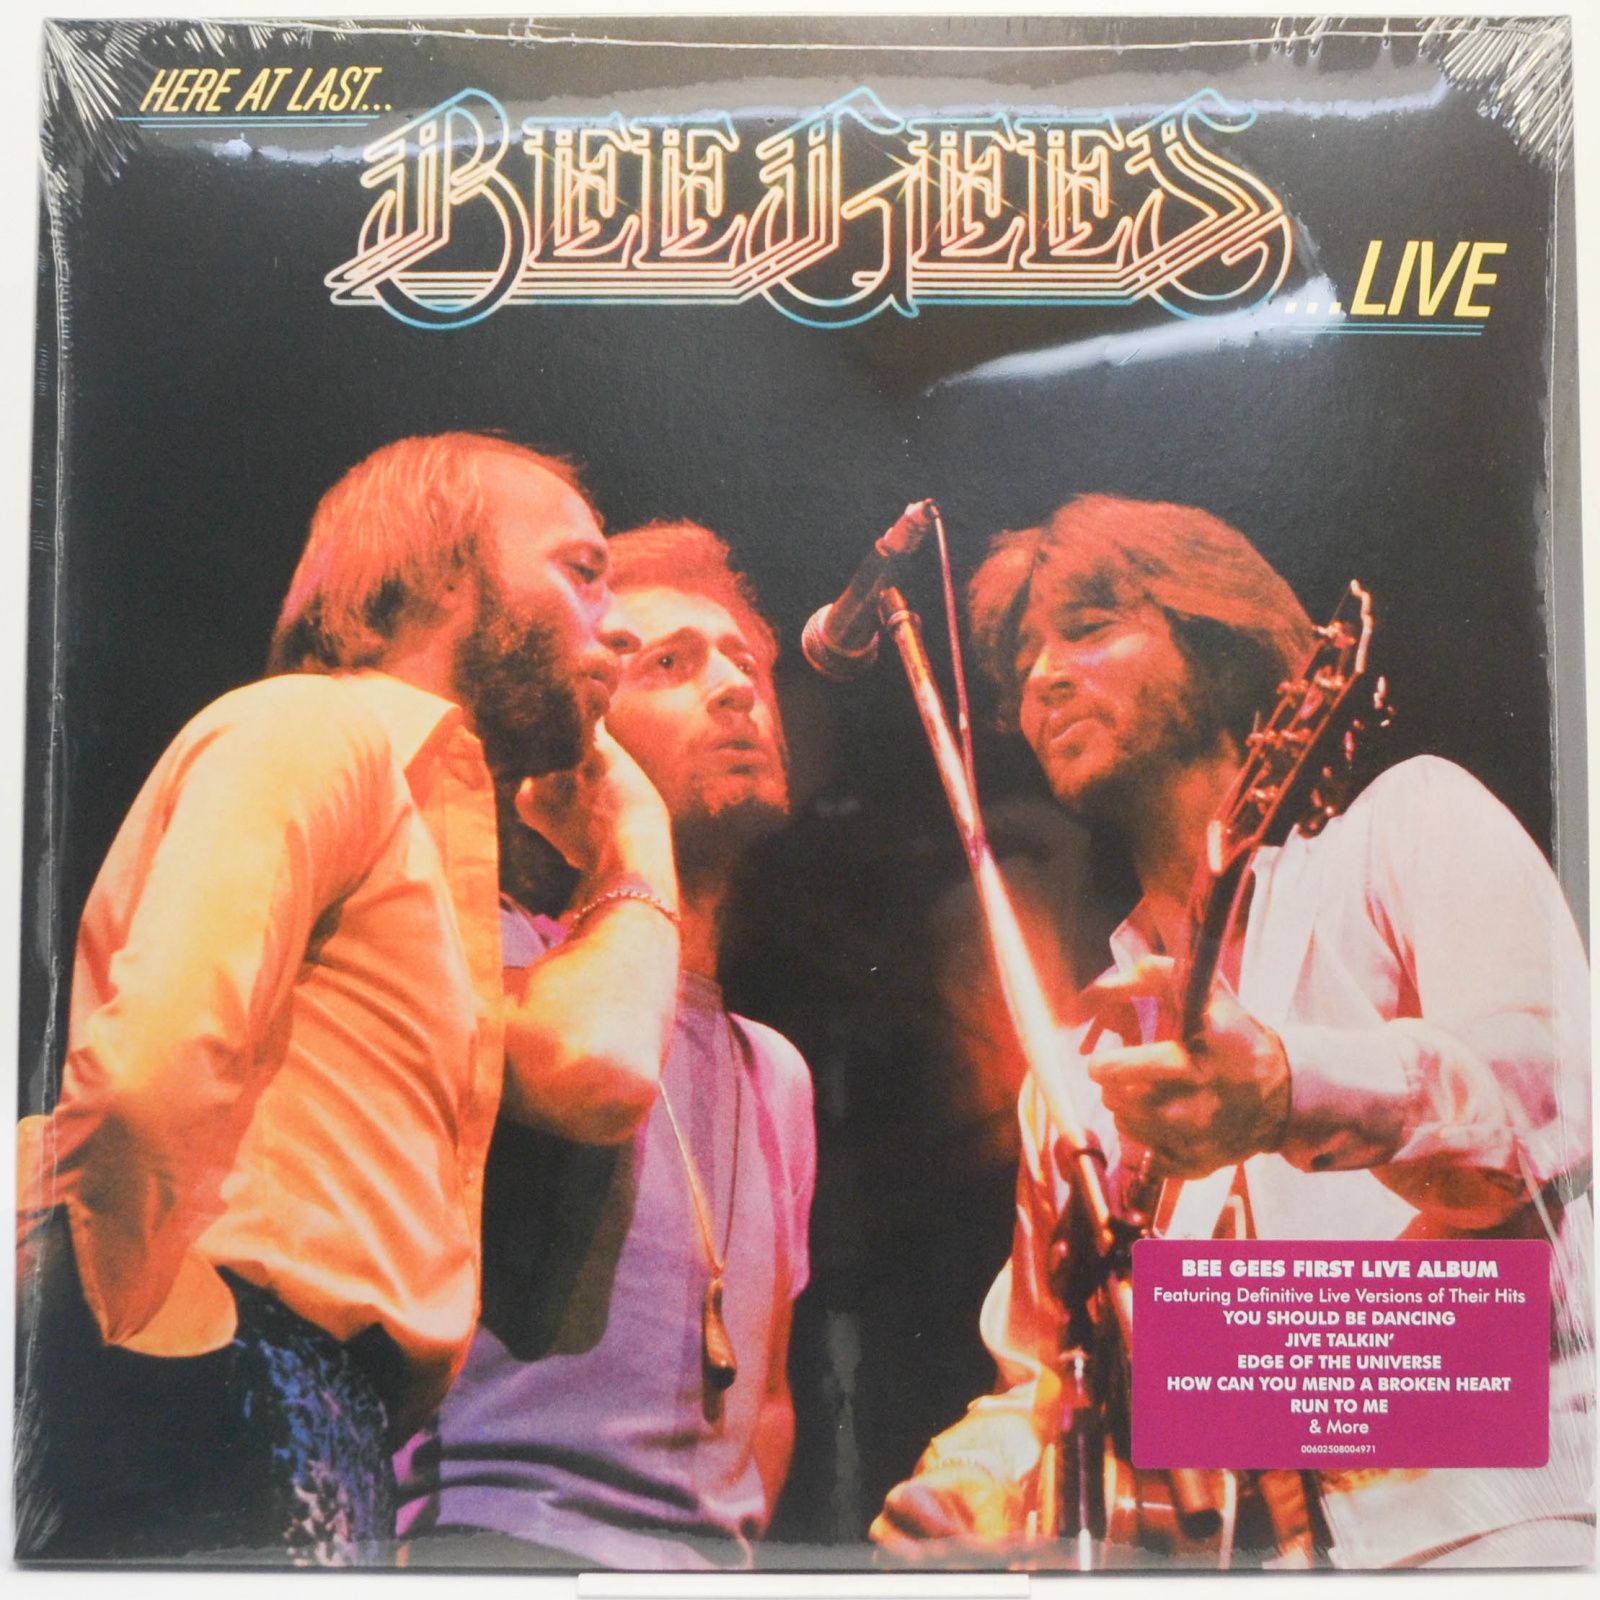 Bee Gees — Here At Last - Bee Gees Live (2LP), 2020